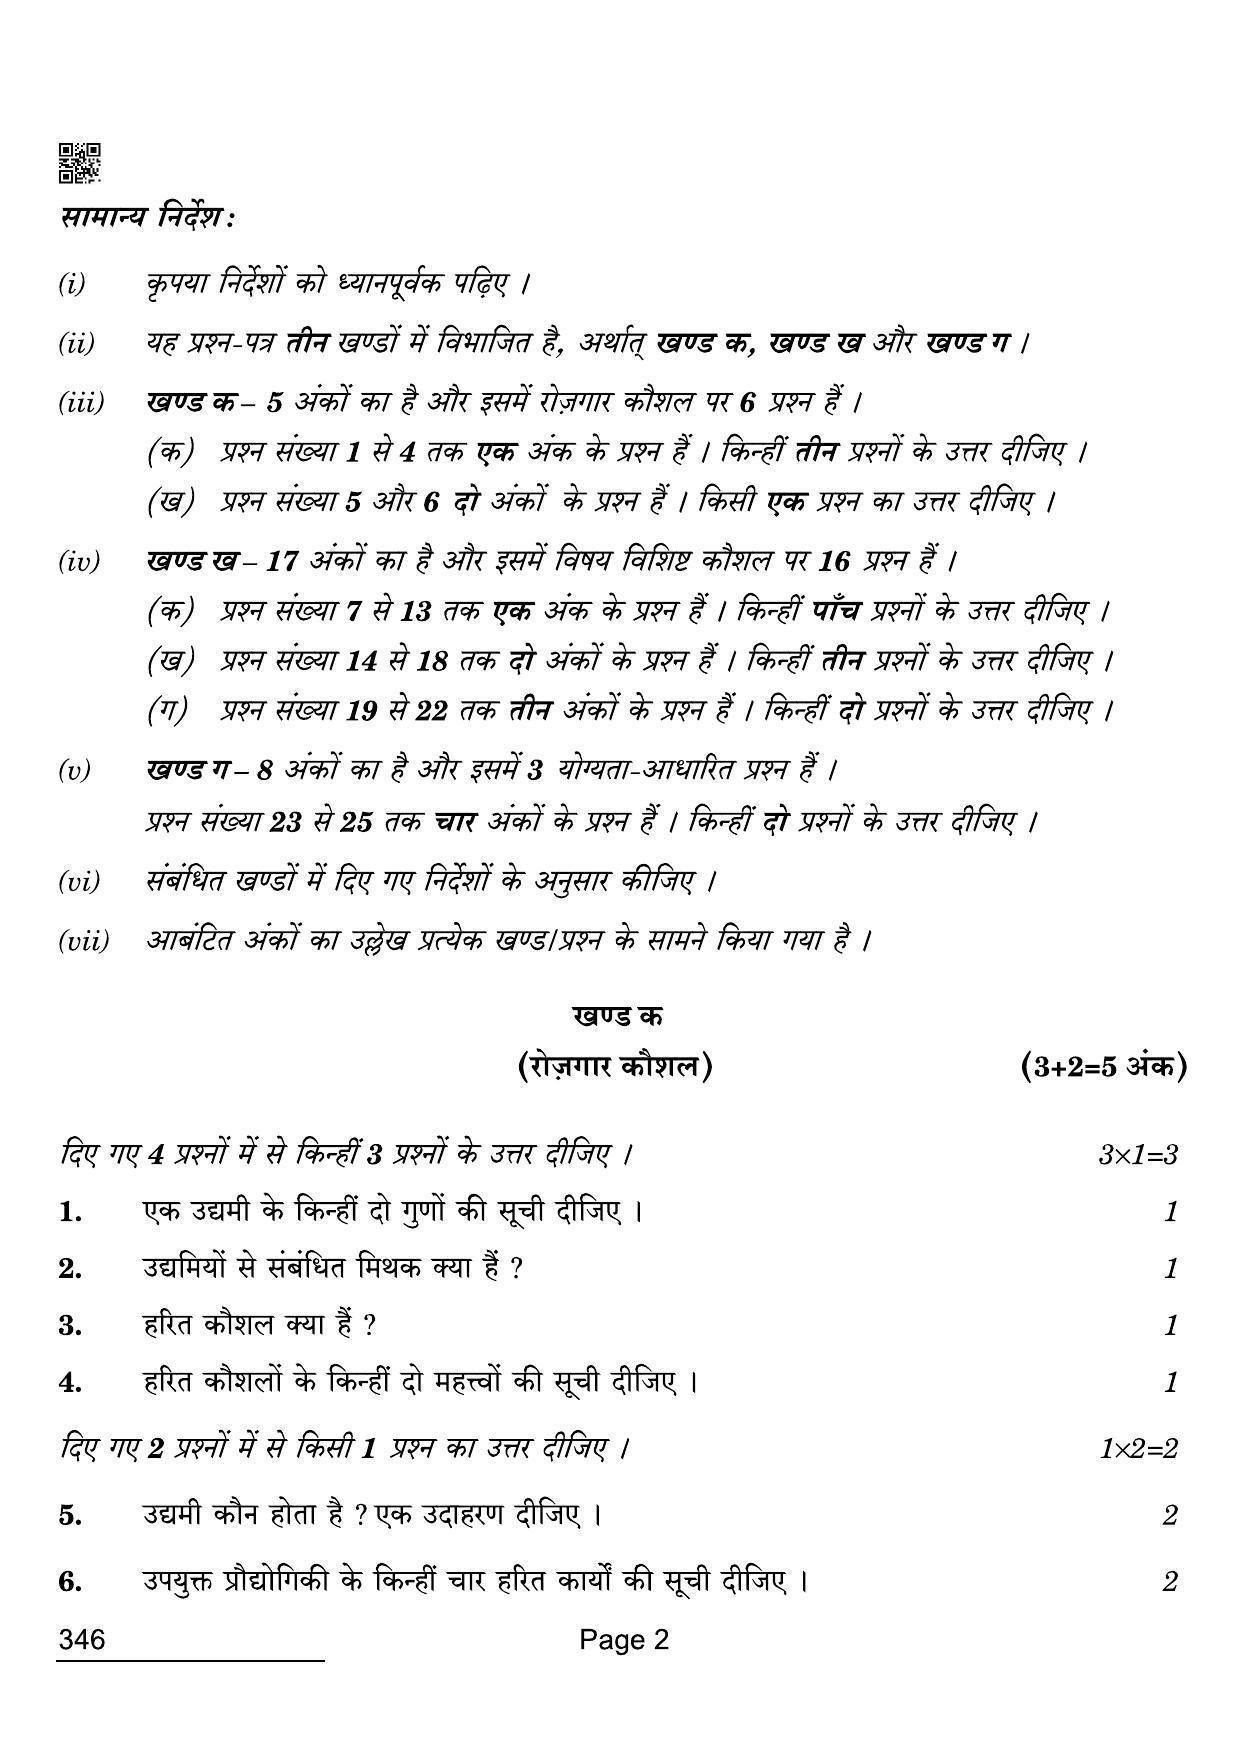 CBSE Class 12 346 Taxation 2022 Compartment Question Paper - Page 2